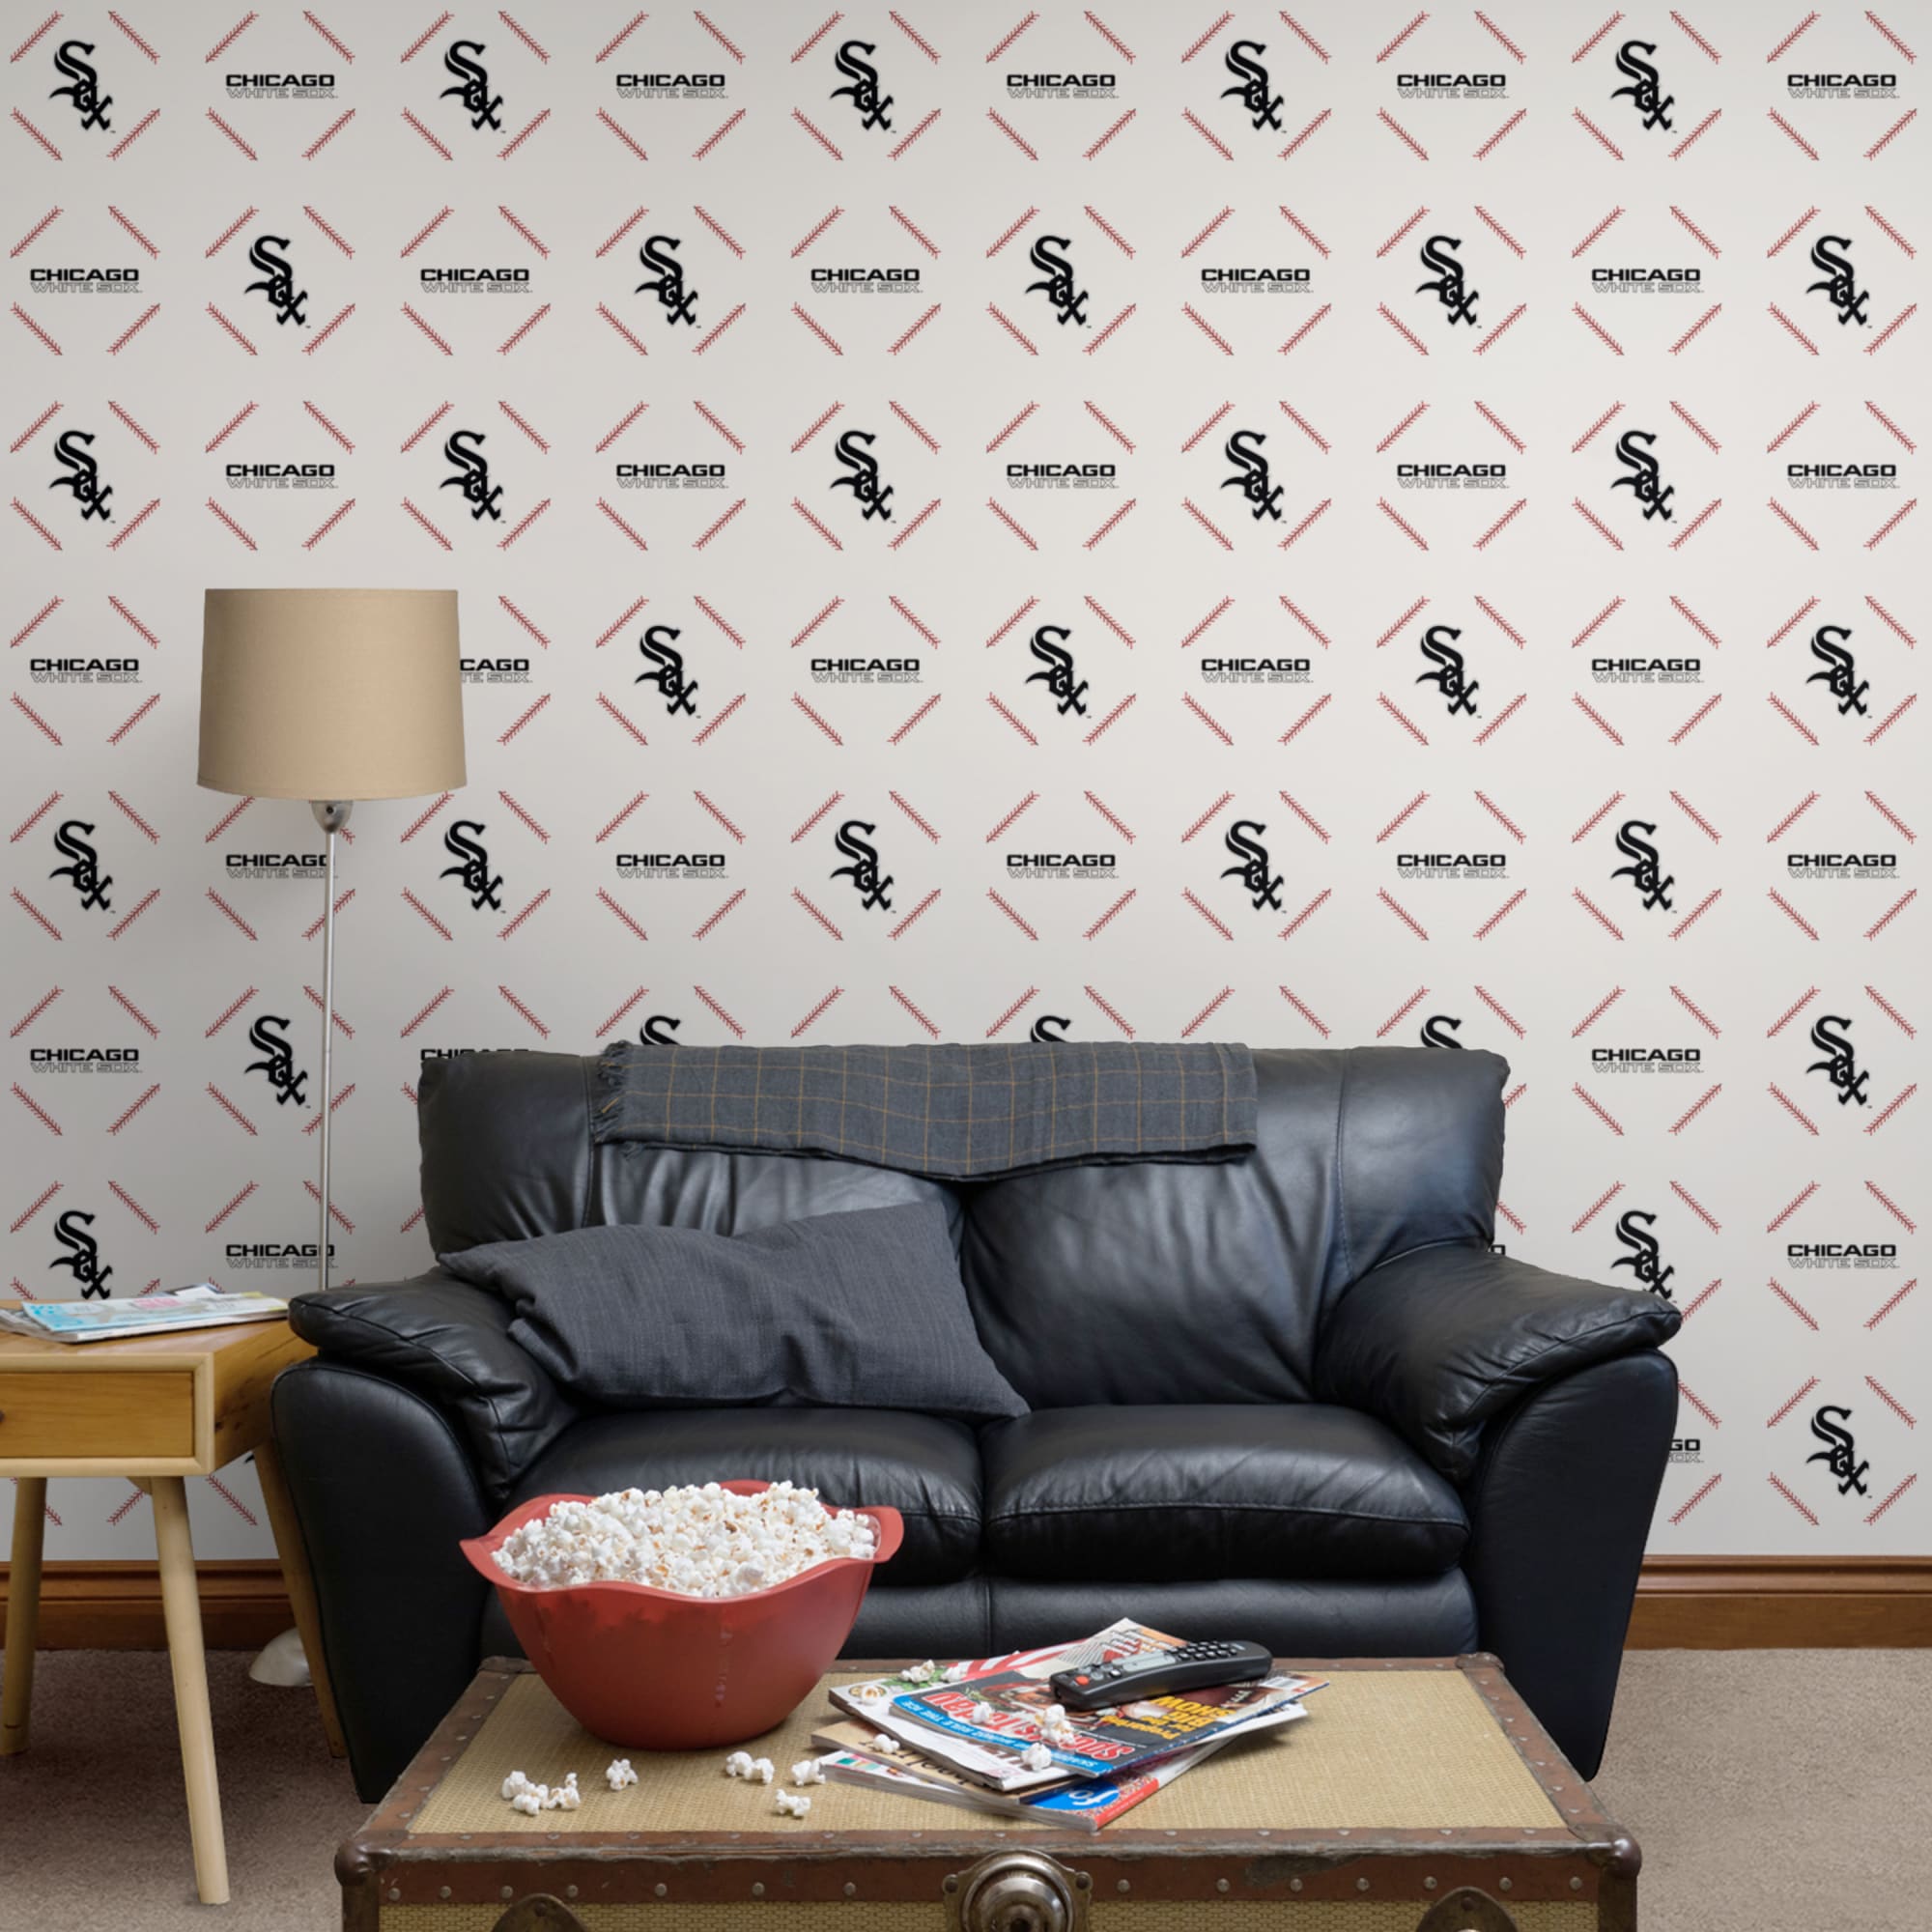 Chicago White Sox: Stitch Pattern - Officially Licensed Removable Wallpaper 12" x 12" Sample by Fathead | 100% Vinyl